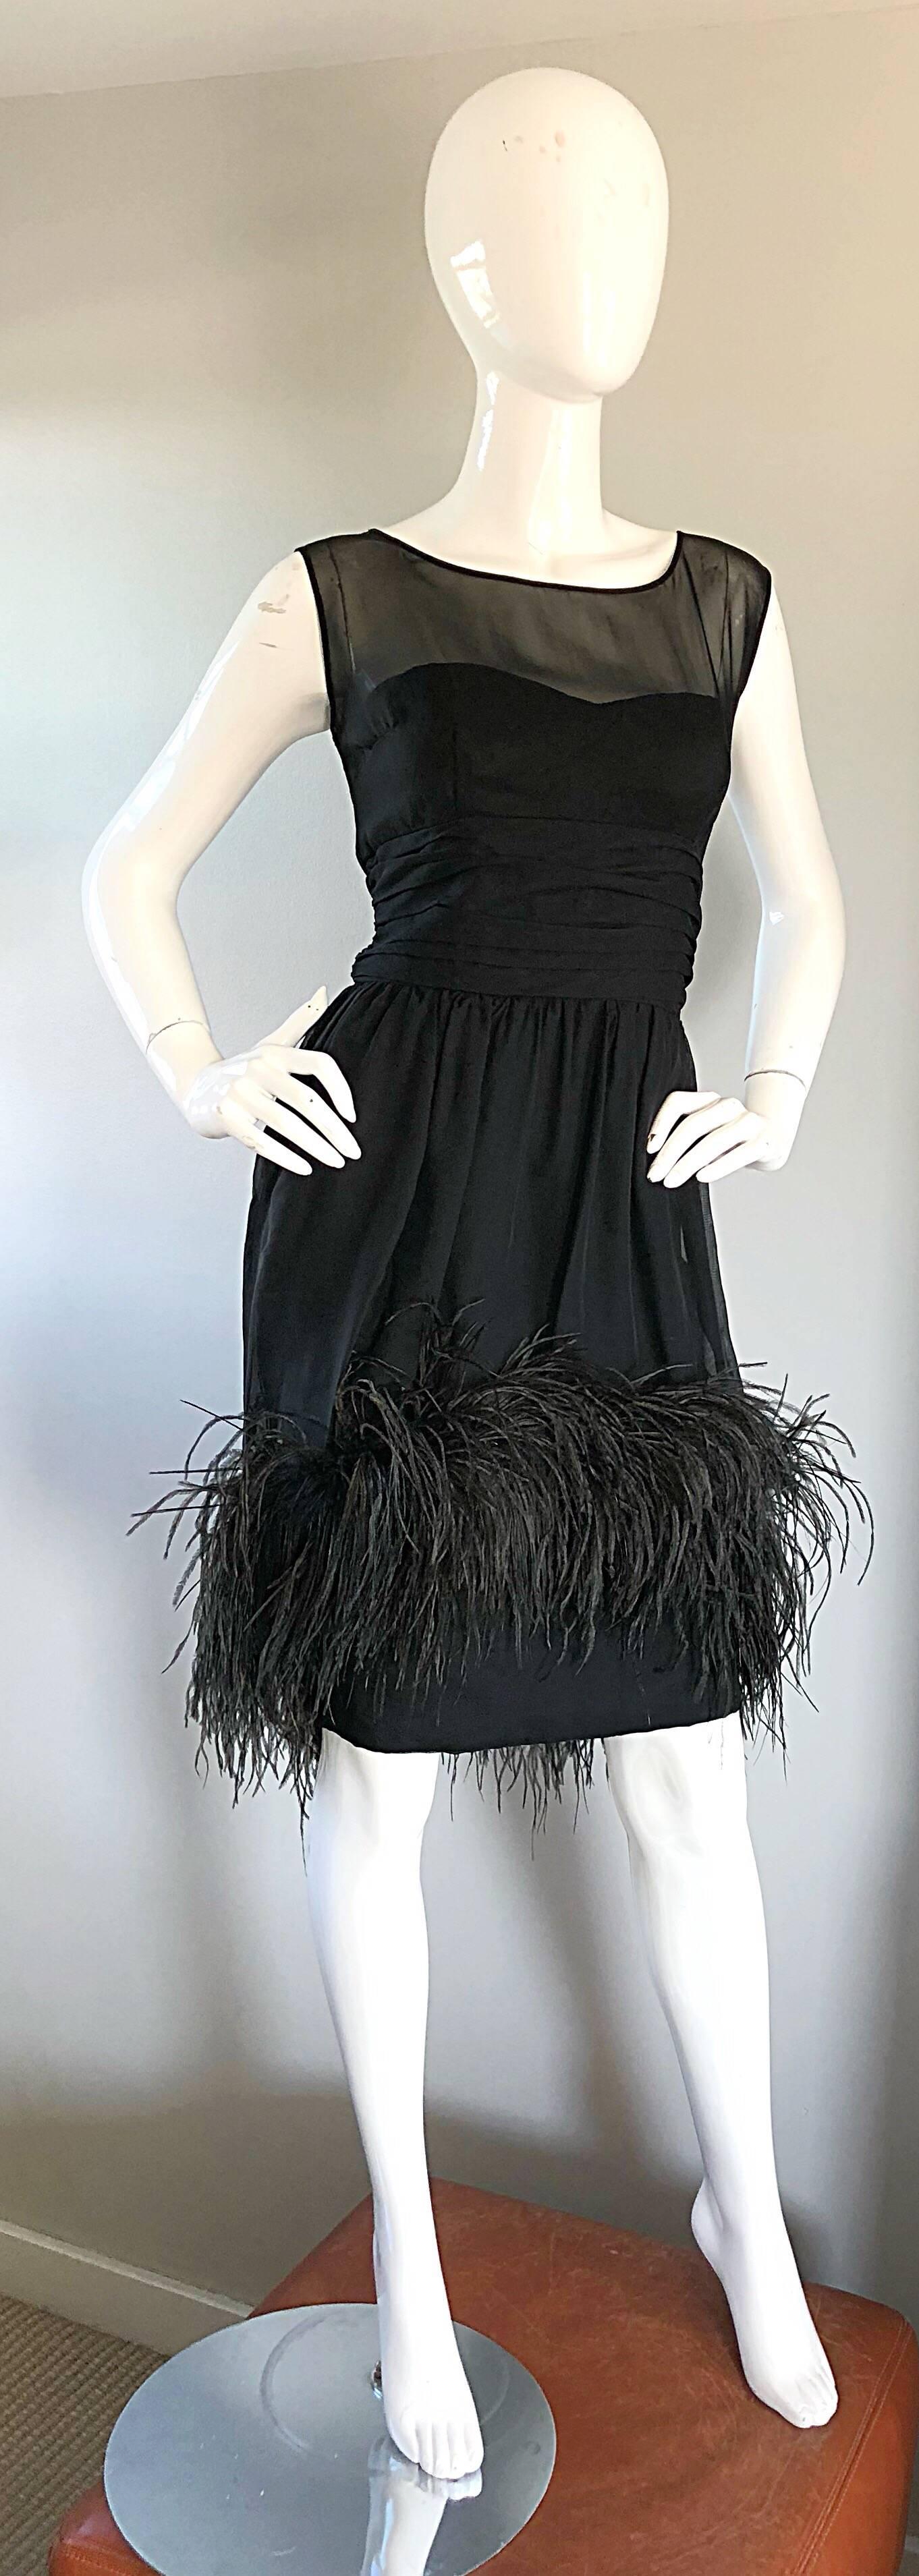 Ferman O'Grady 1950s Demi Couture Black Silk Chiffon Feather 50s Vintage Dress In Excellent Condition For Sale In San Diego, CA